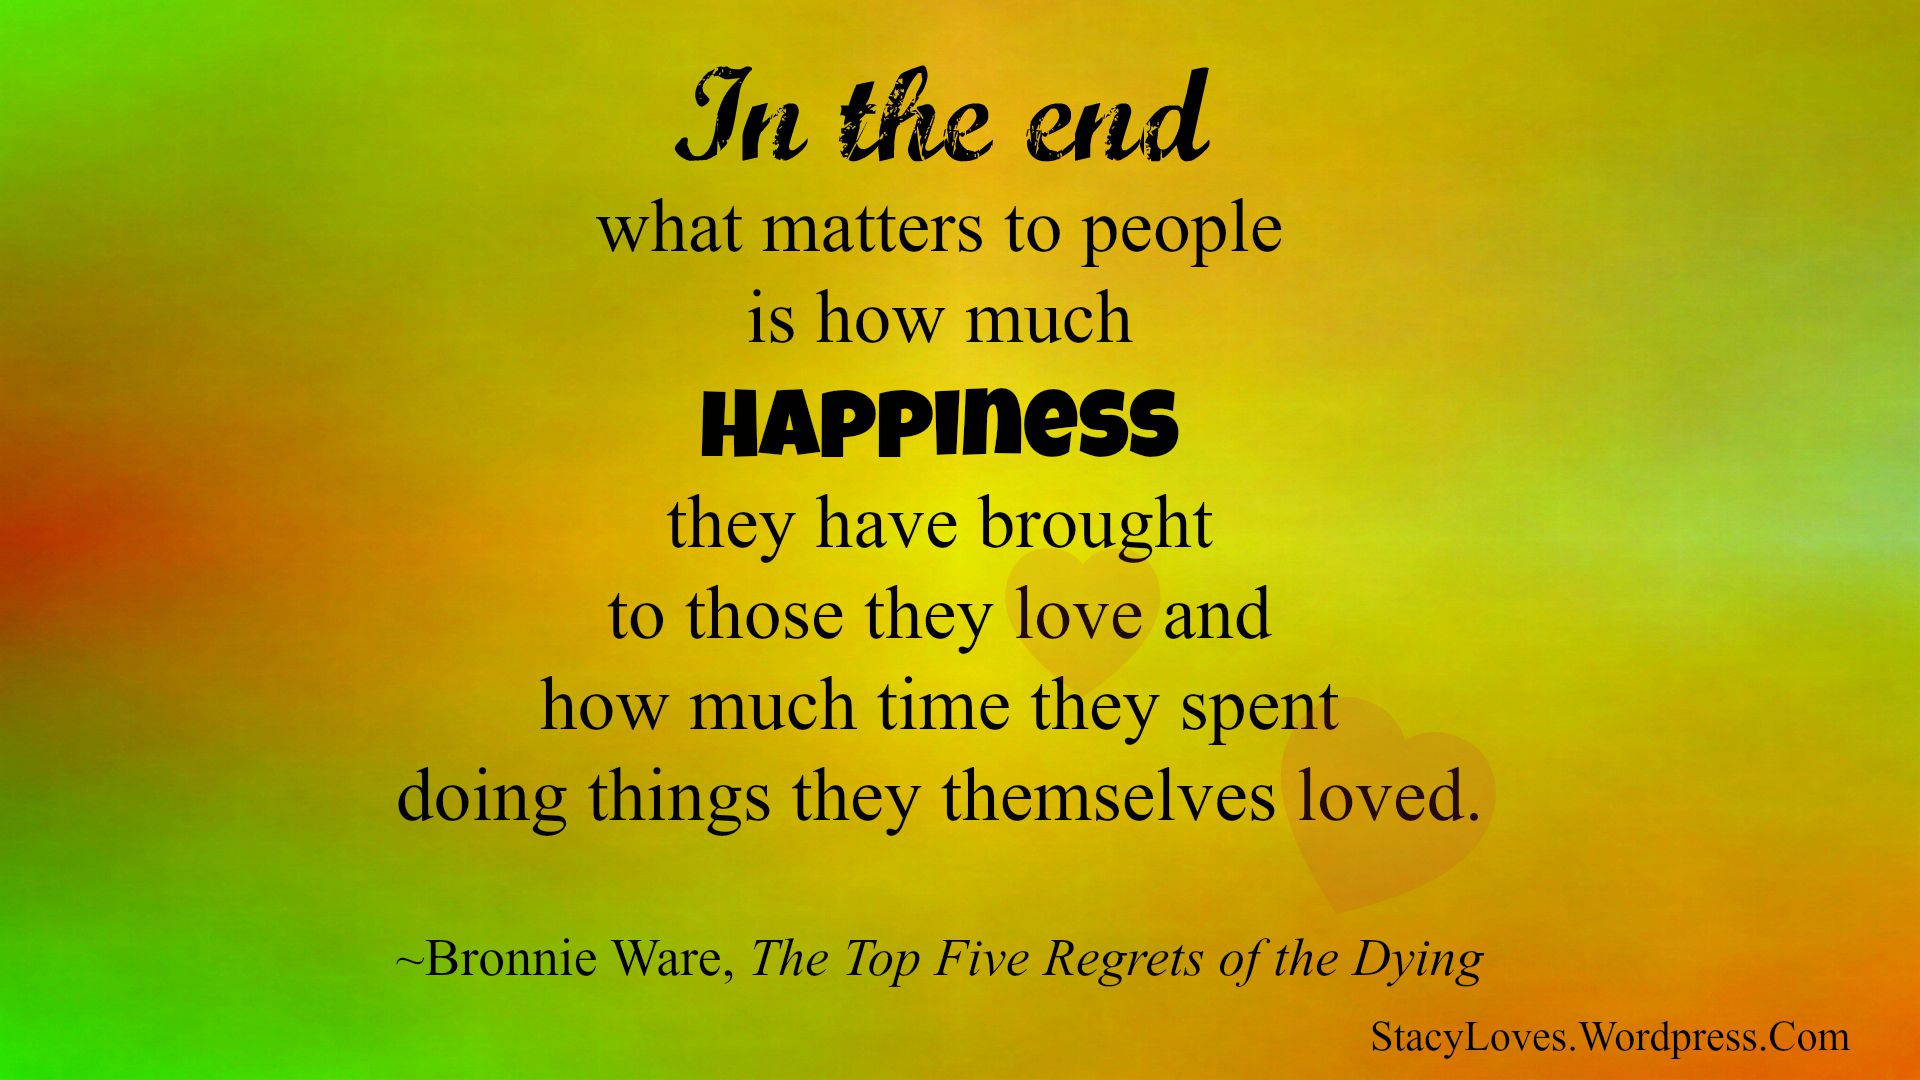 evne skelet Fonetik Book Review: The Top Five Regrets of the Dying | Stacy Loves...